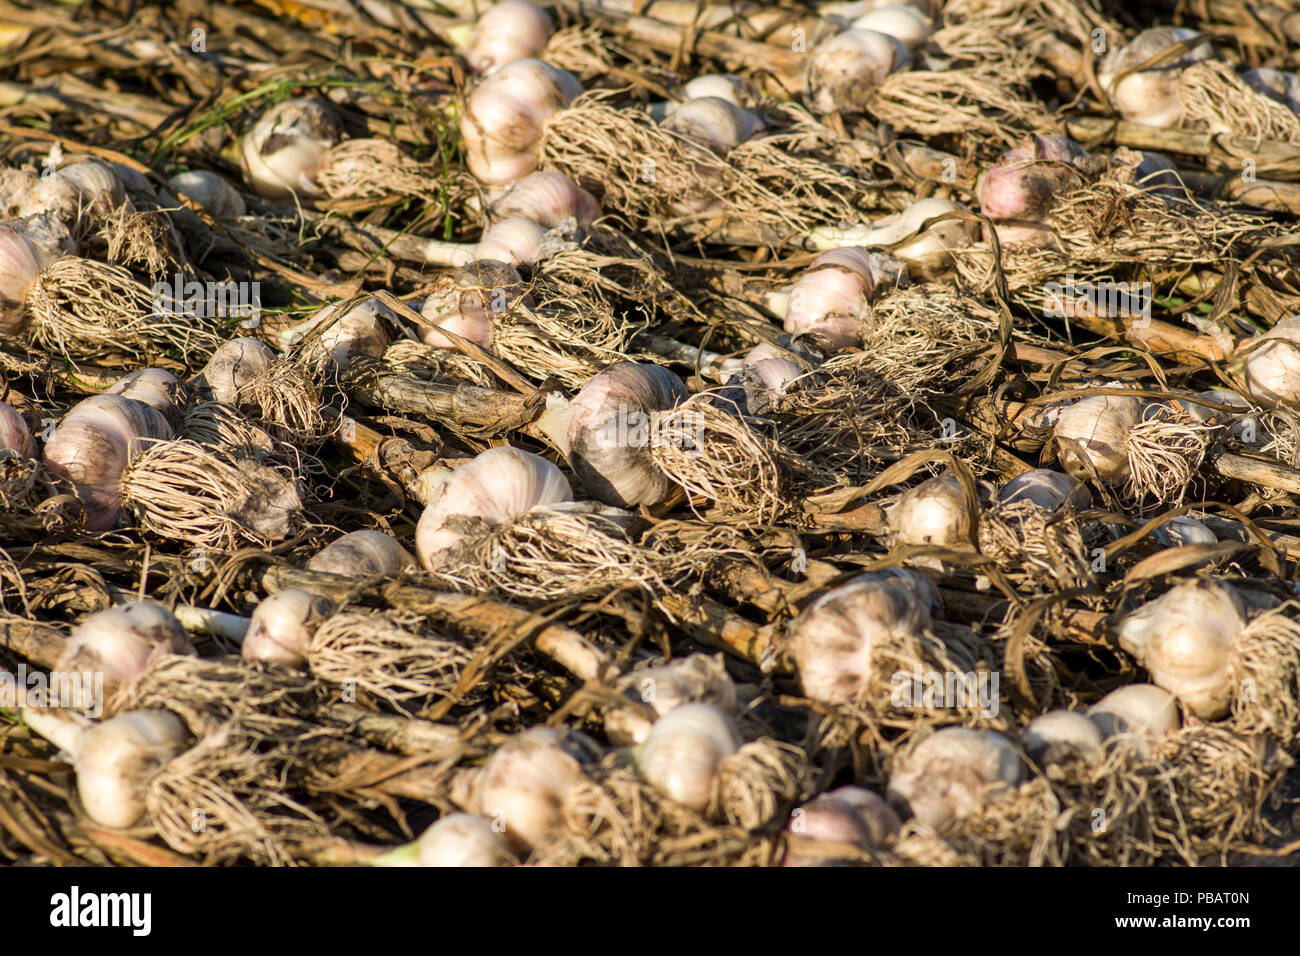 Freshly picked garlic set out to dry in the sun. Stock Photo